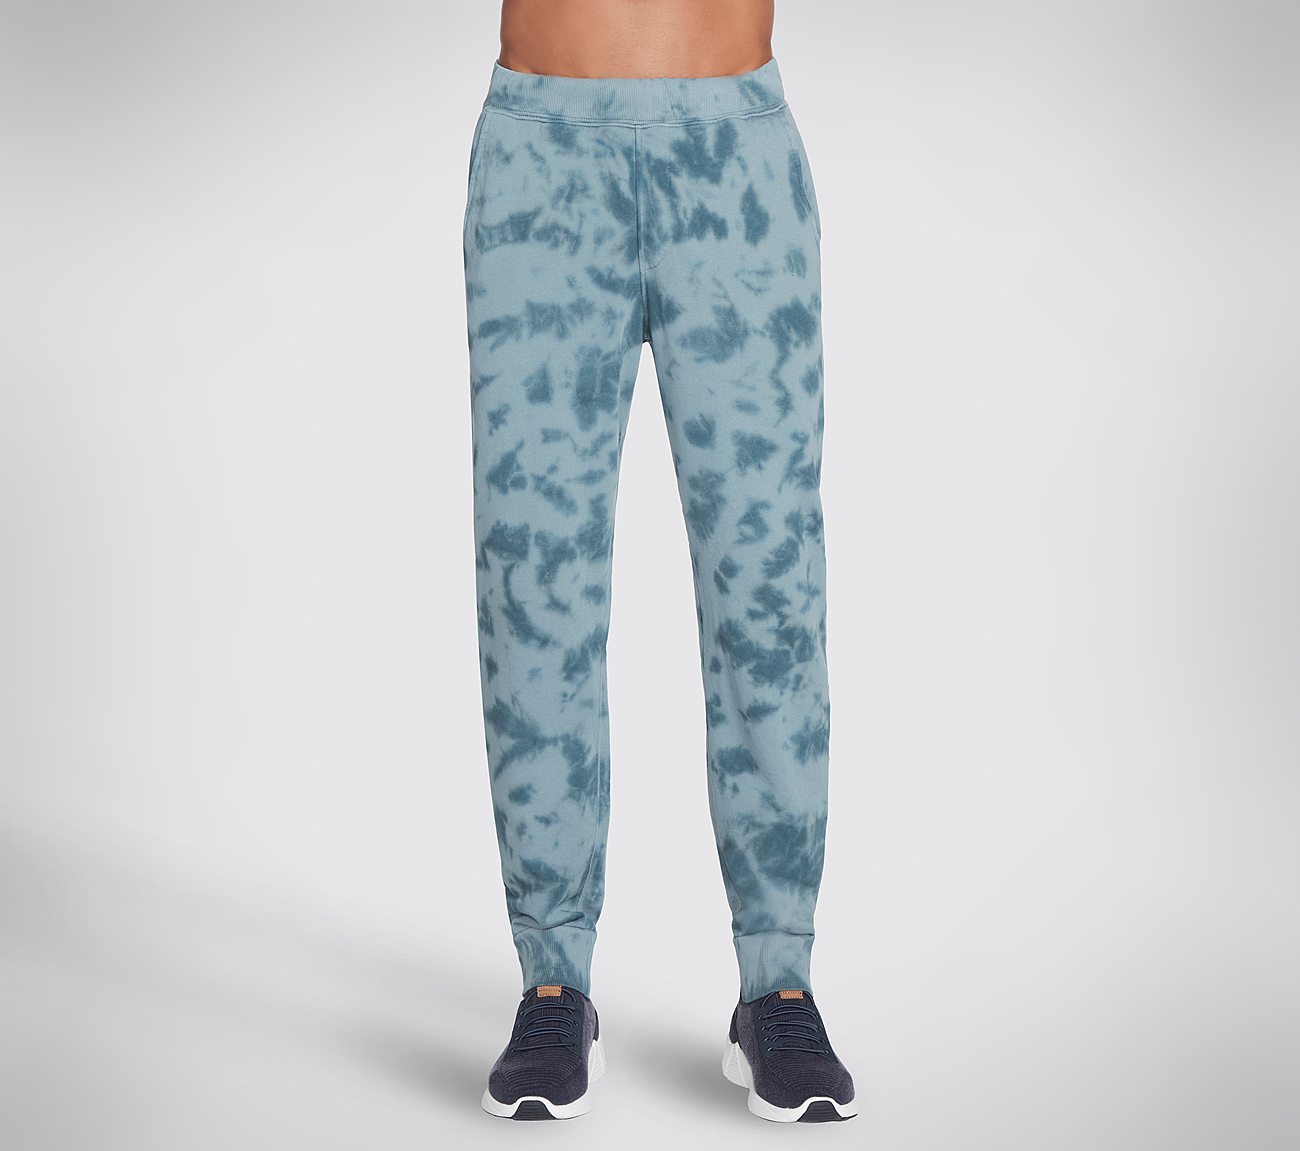 SKECHSWEATS DIAMOND DYE EXPED, BLUE/GREY Apparel Lateral View